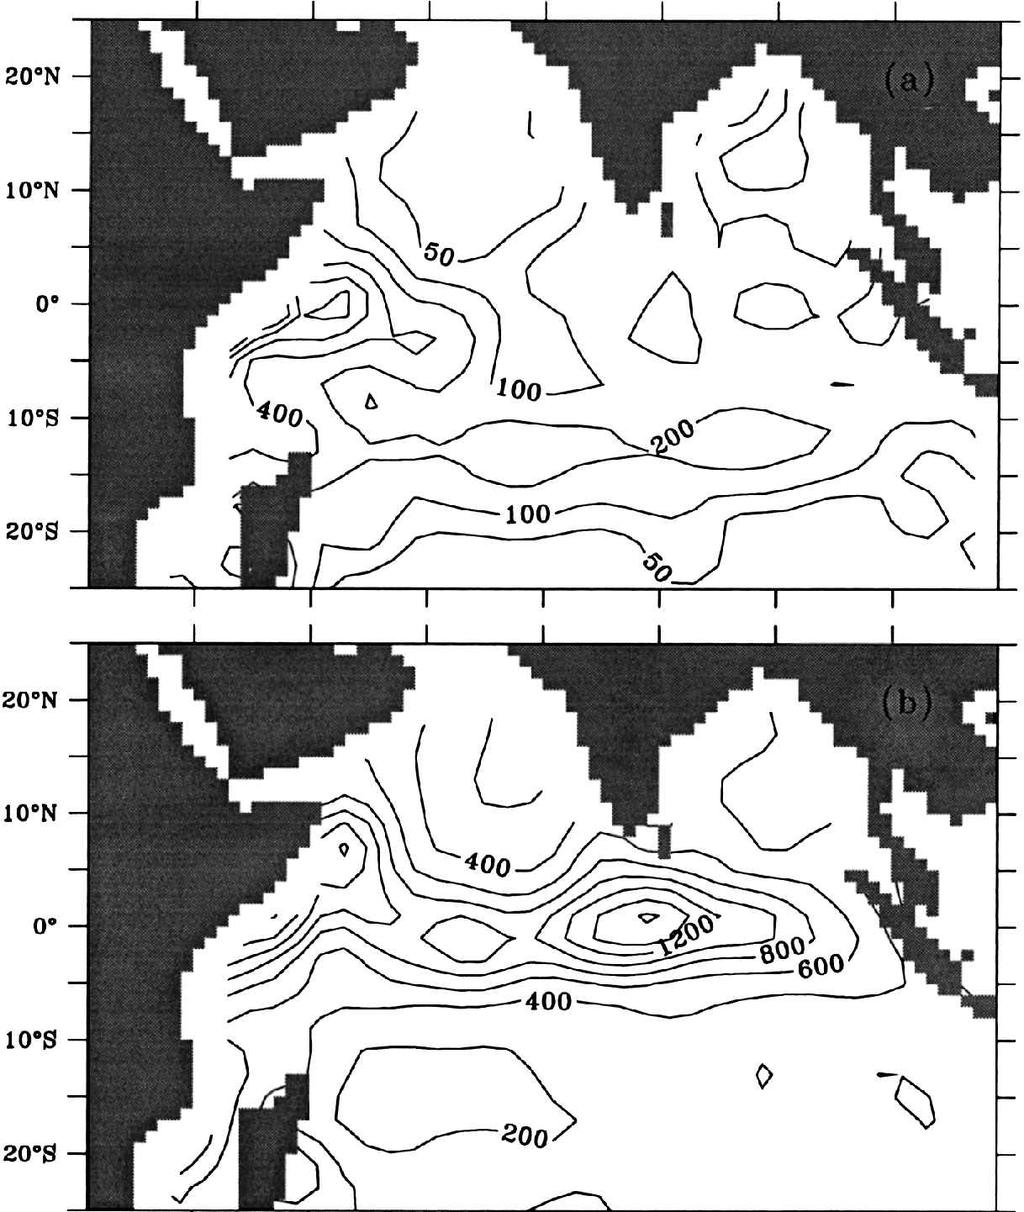 898 Journal of Marine Research [57, 6 Figure 7. Distribution of kinetic energy per unit mass based on a 2 -square analysis of surface velocity eld.